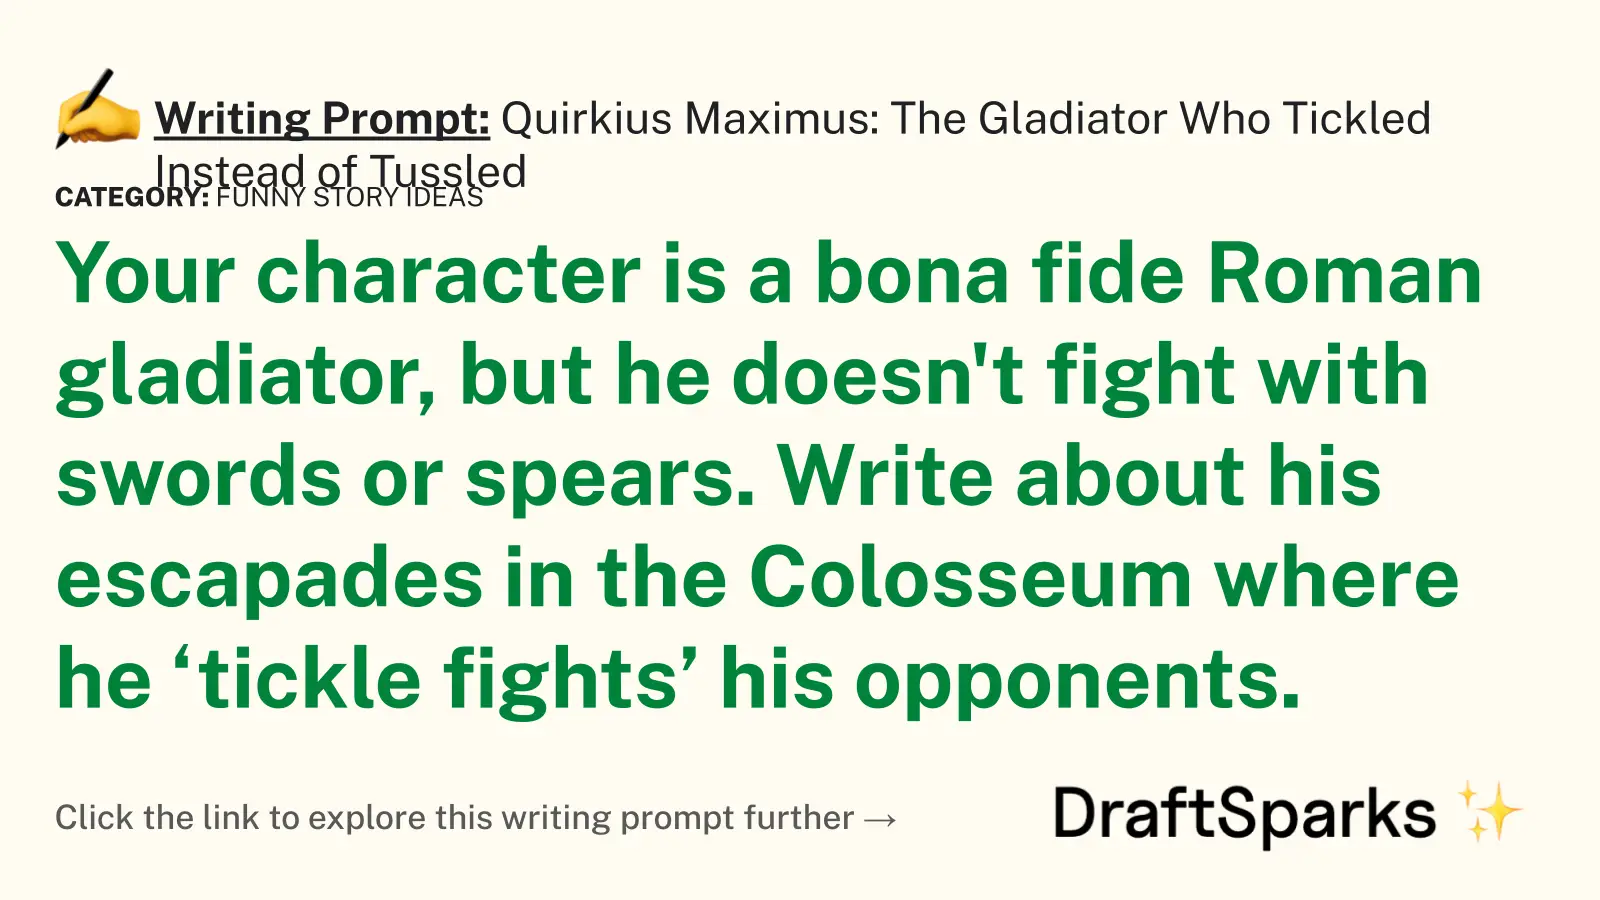 Quirkius Maximus: The Gladiator Who Tickled Instead of Tussled